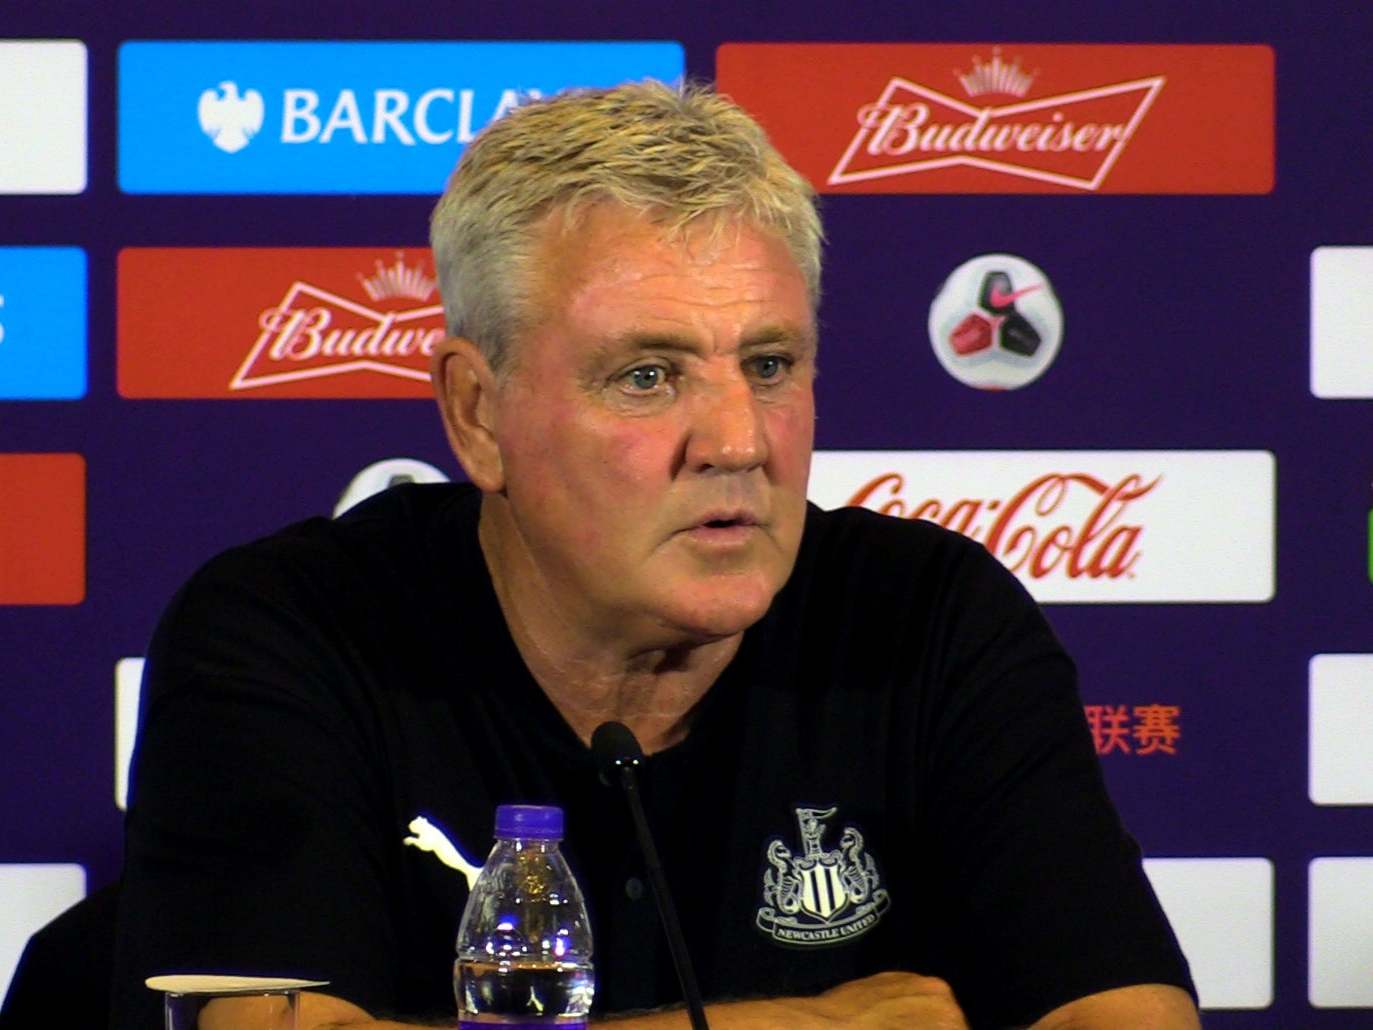 Steve Bruce is unveiled as the new Newcastle manager